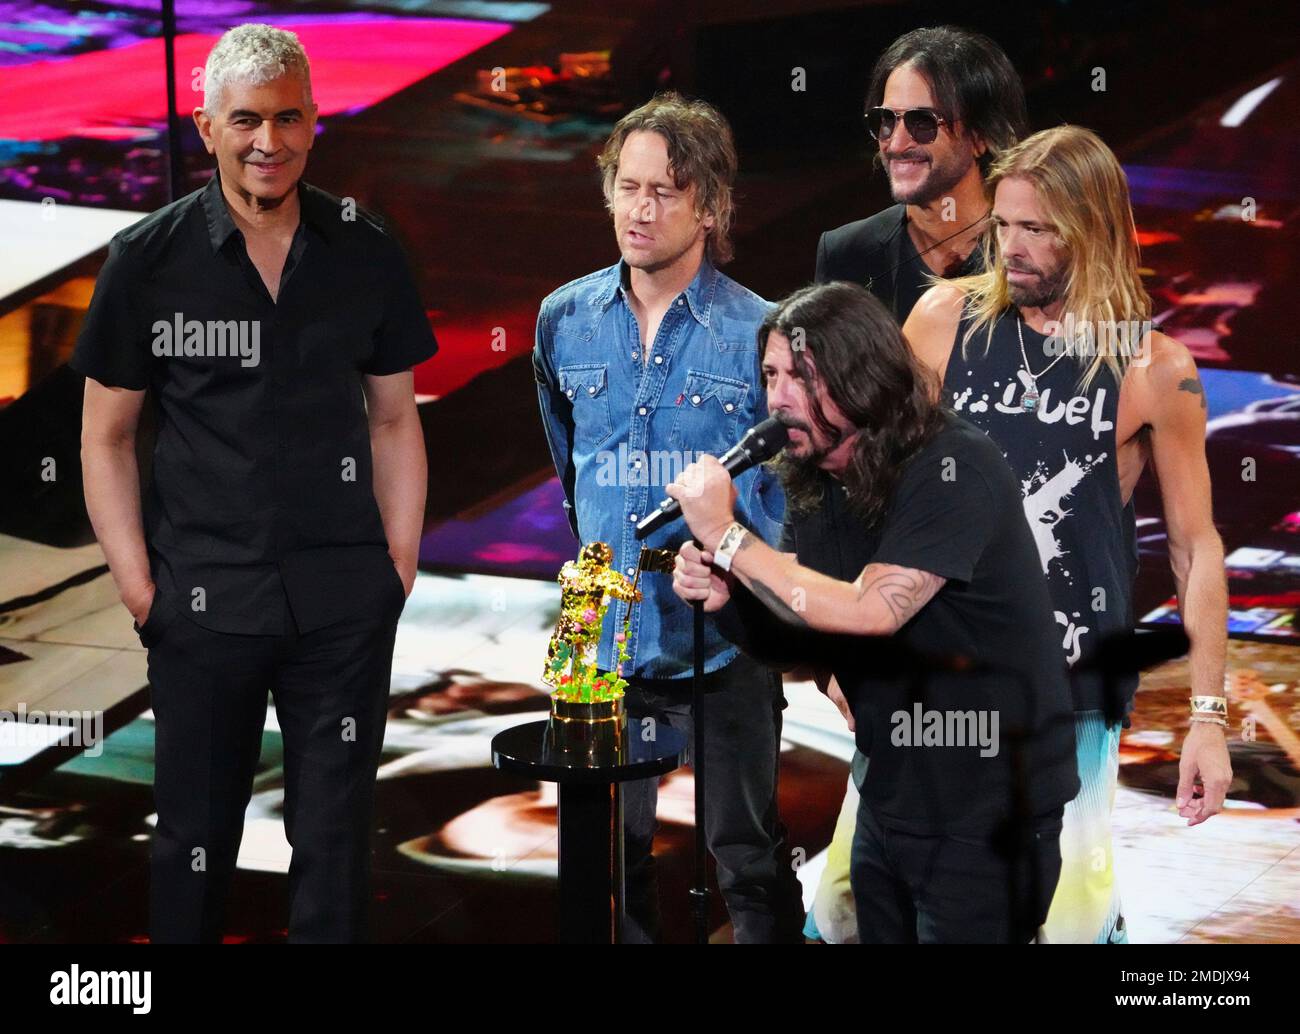 Pat Smear, from left, Chris Shiflett, Dave Grohl, Taylor Hawkins, Rami Jaffee, of the Foo Fighters accept the global icon award at the MTV Video Music Awards at Barclays Center on Sunday,